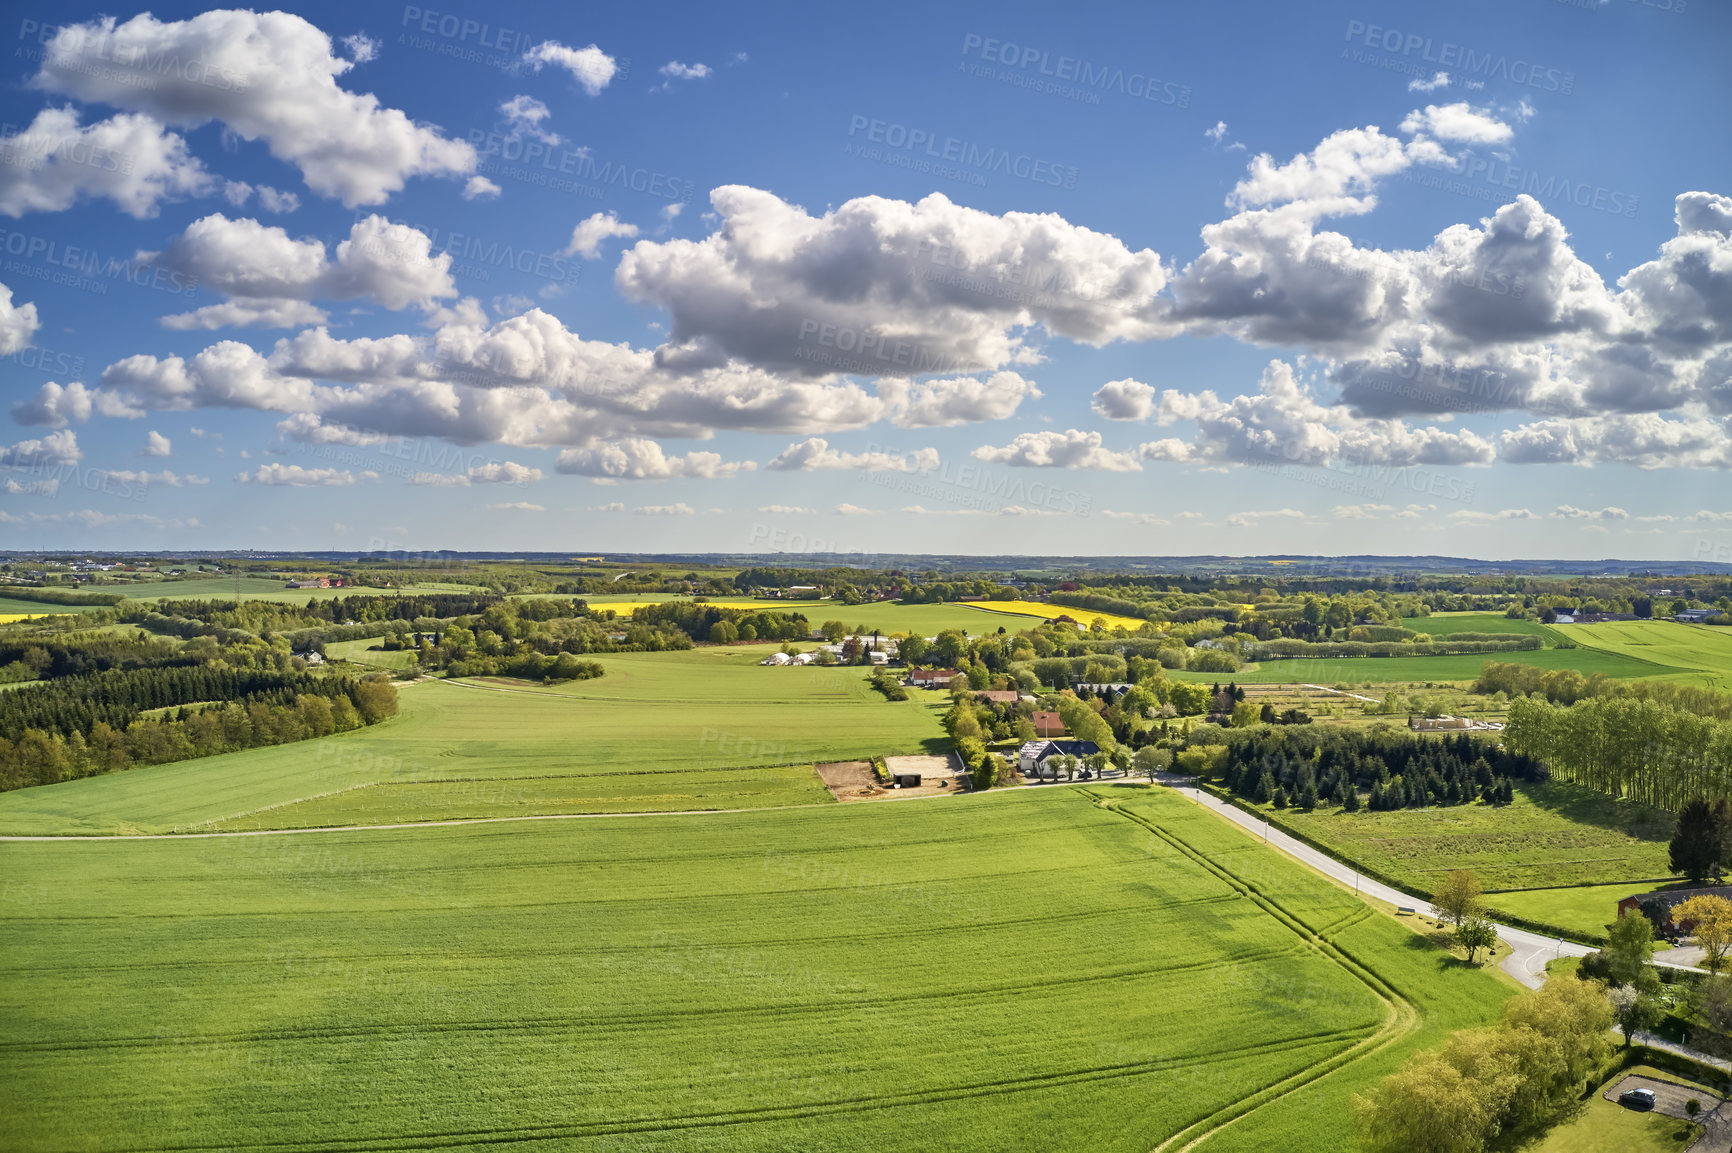 Buy stock photo Scenic remote landscape view of a green farmland on the countryside of Jutland, Denmark. Secluded and empty grassland against a cloudy blue sky in summer. Deserted scenery in a quiet rural area